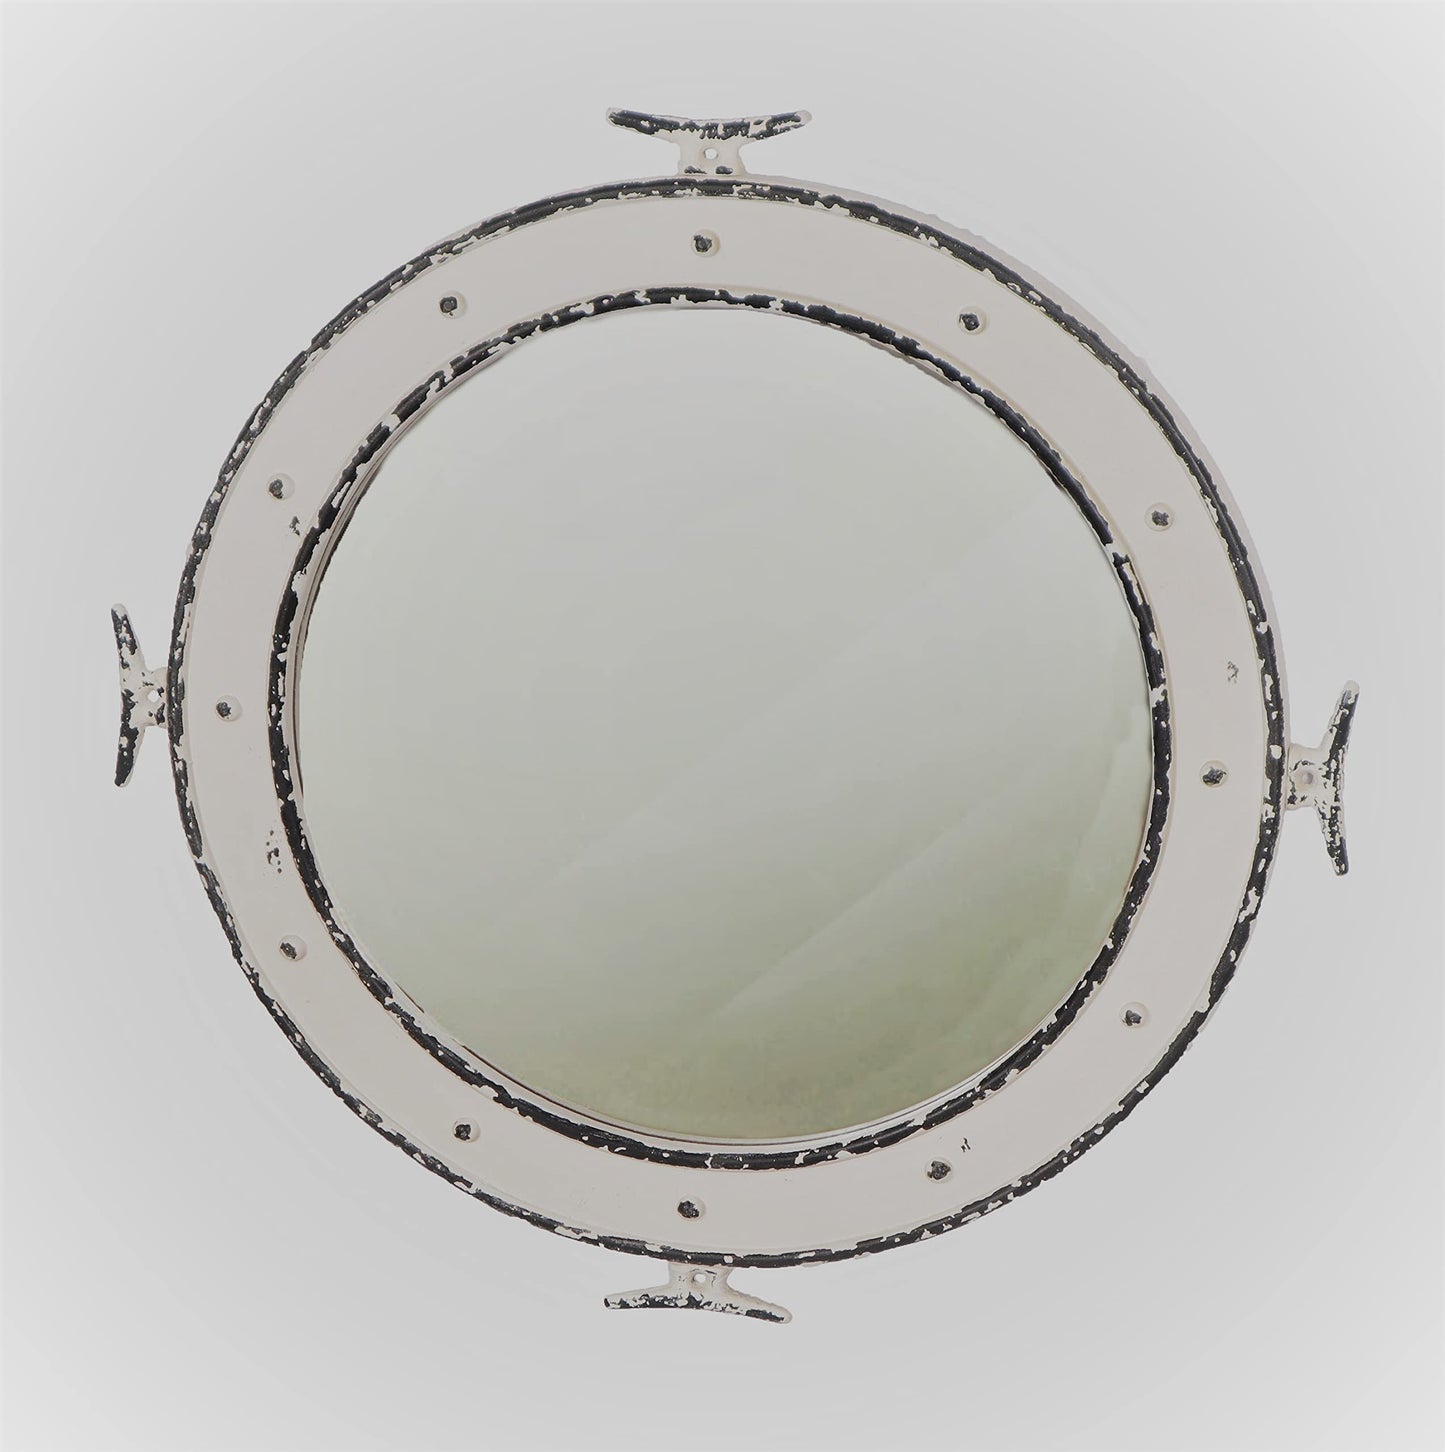 28" Distressed Wooden Porthole Mirror with Cleat Nautical Decoration - Antique Rustic Porthole